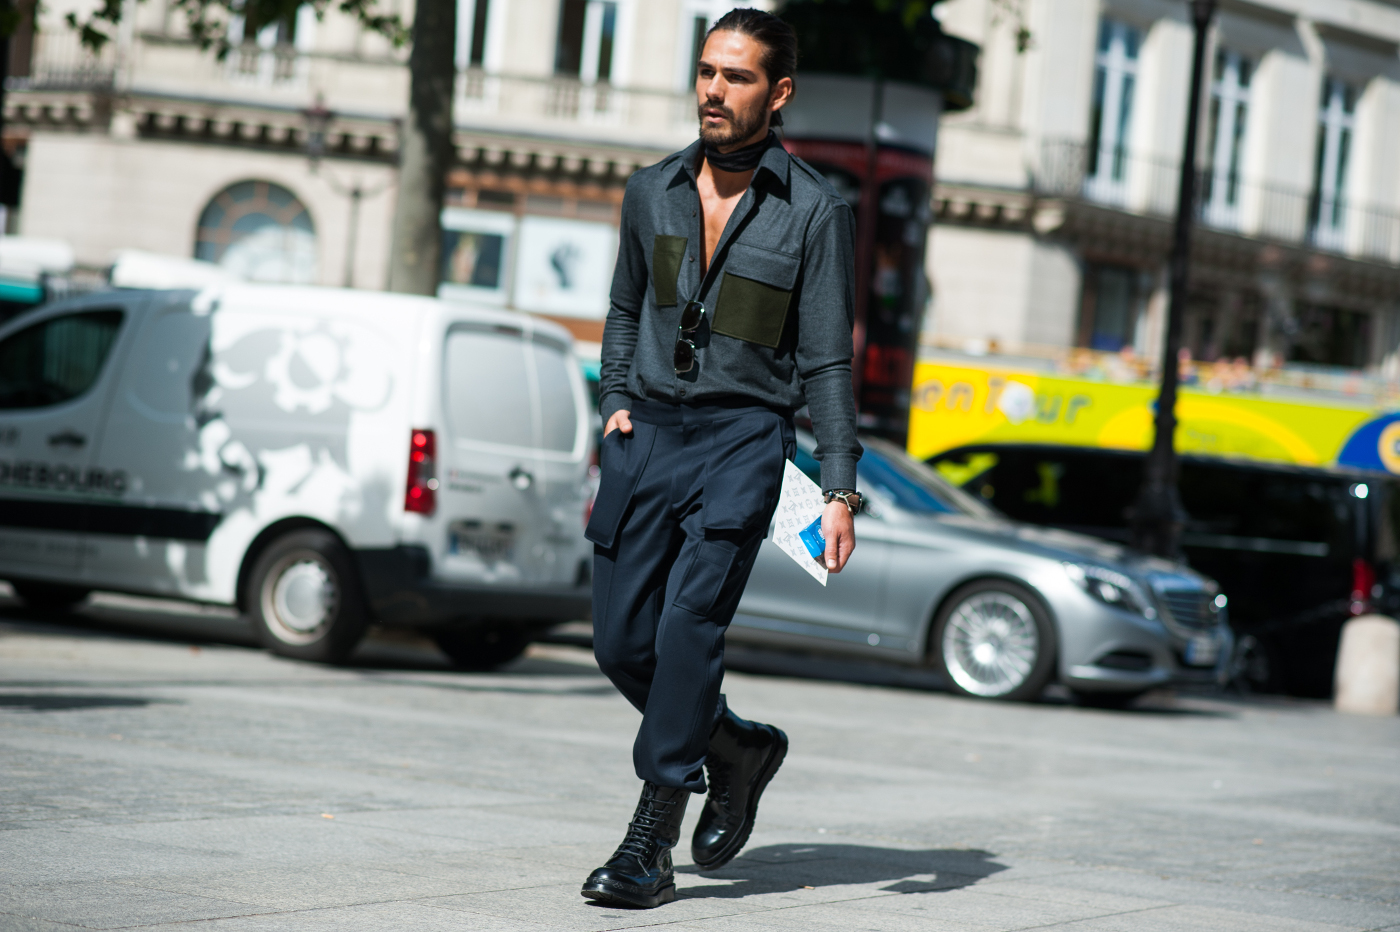 10 of the Best: Street Style Looks from Paris Men’s Fashion Week SS17